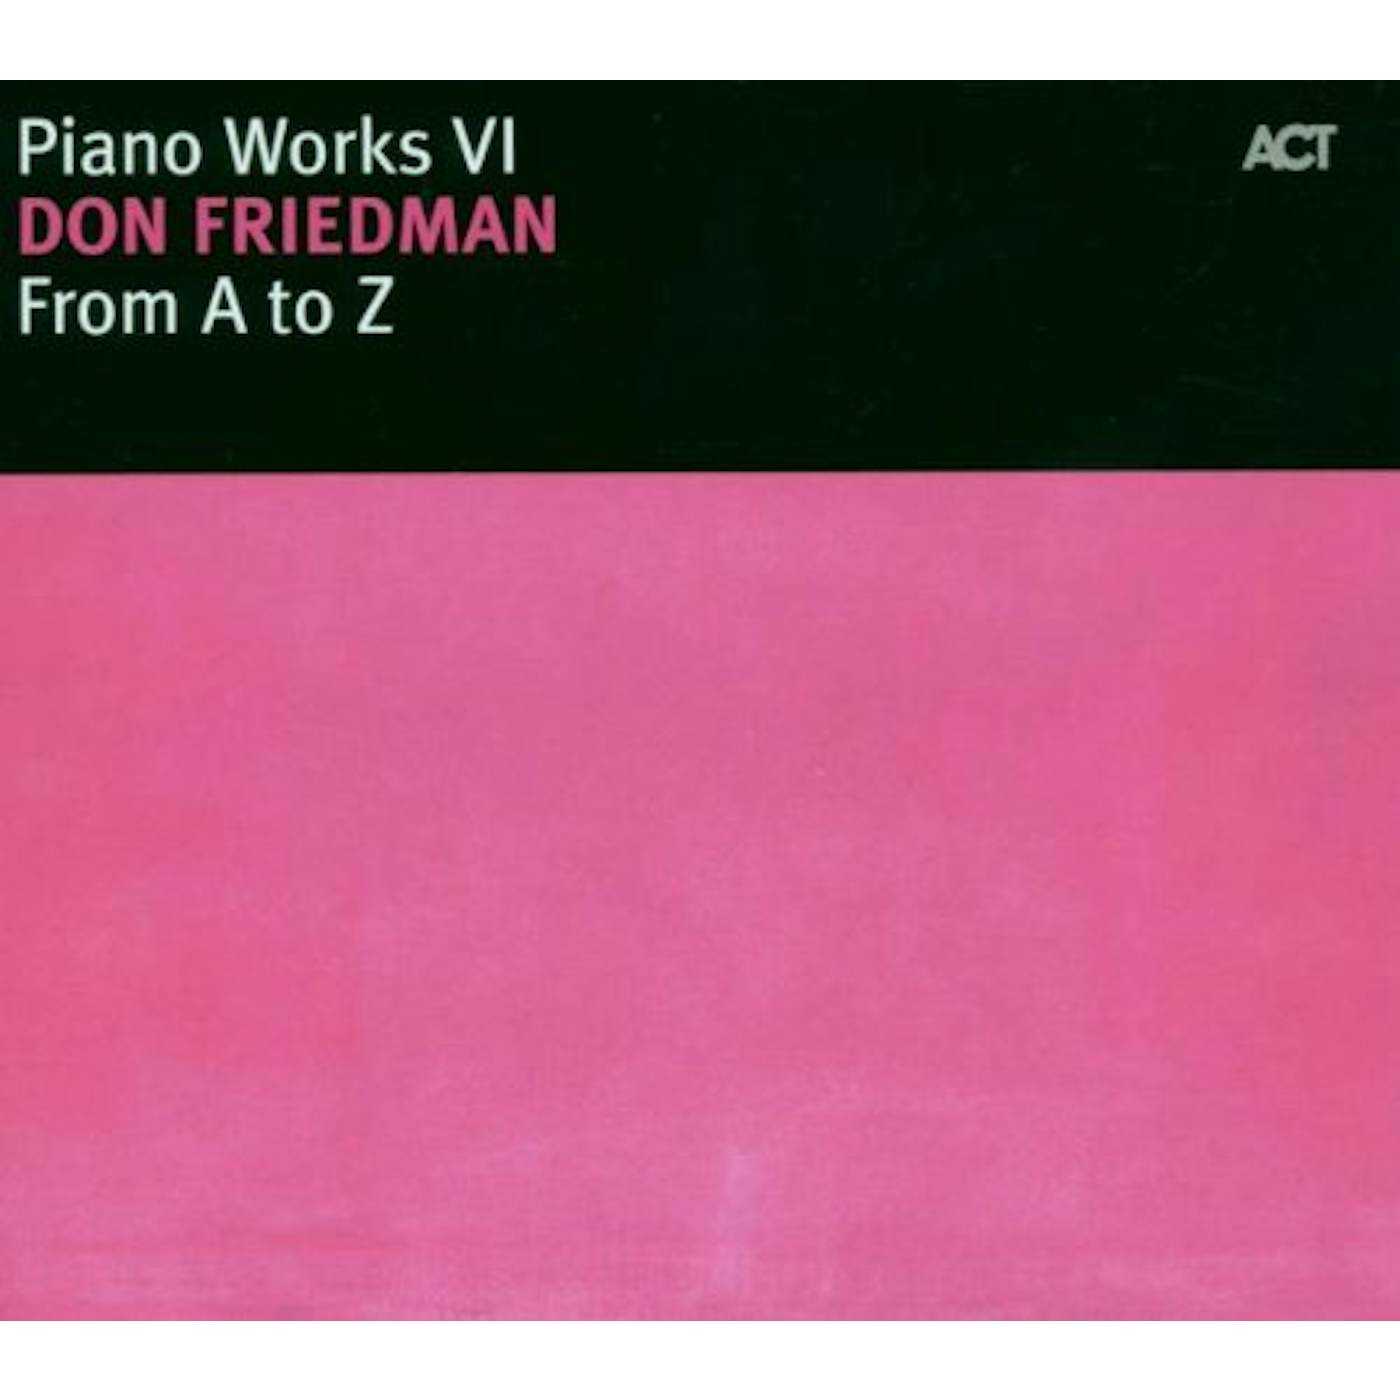 Don Friedman VOL. 6-PIANO WORKS: FROM A TO Z CD